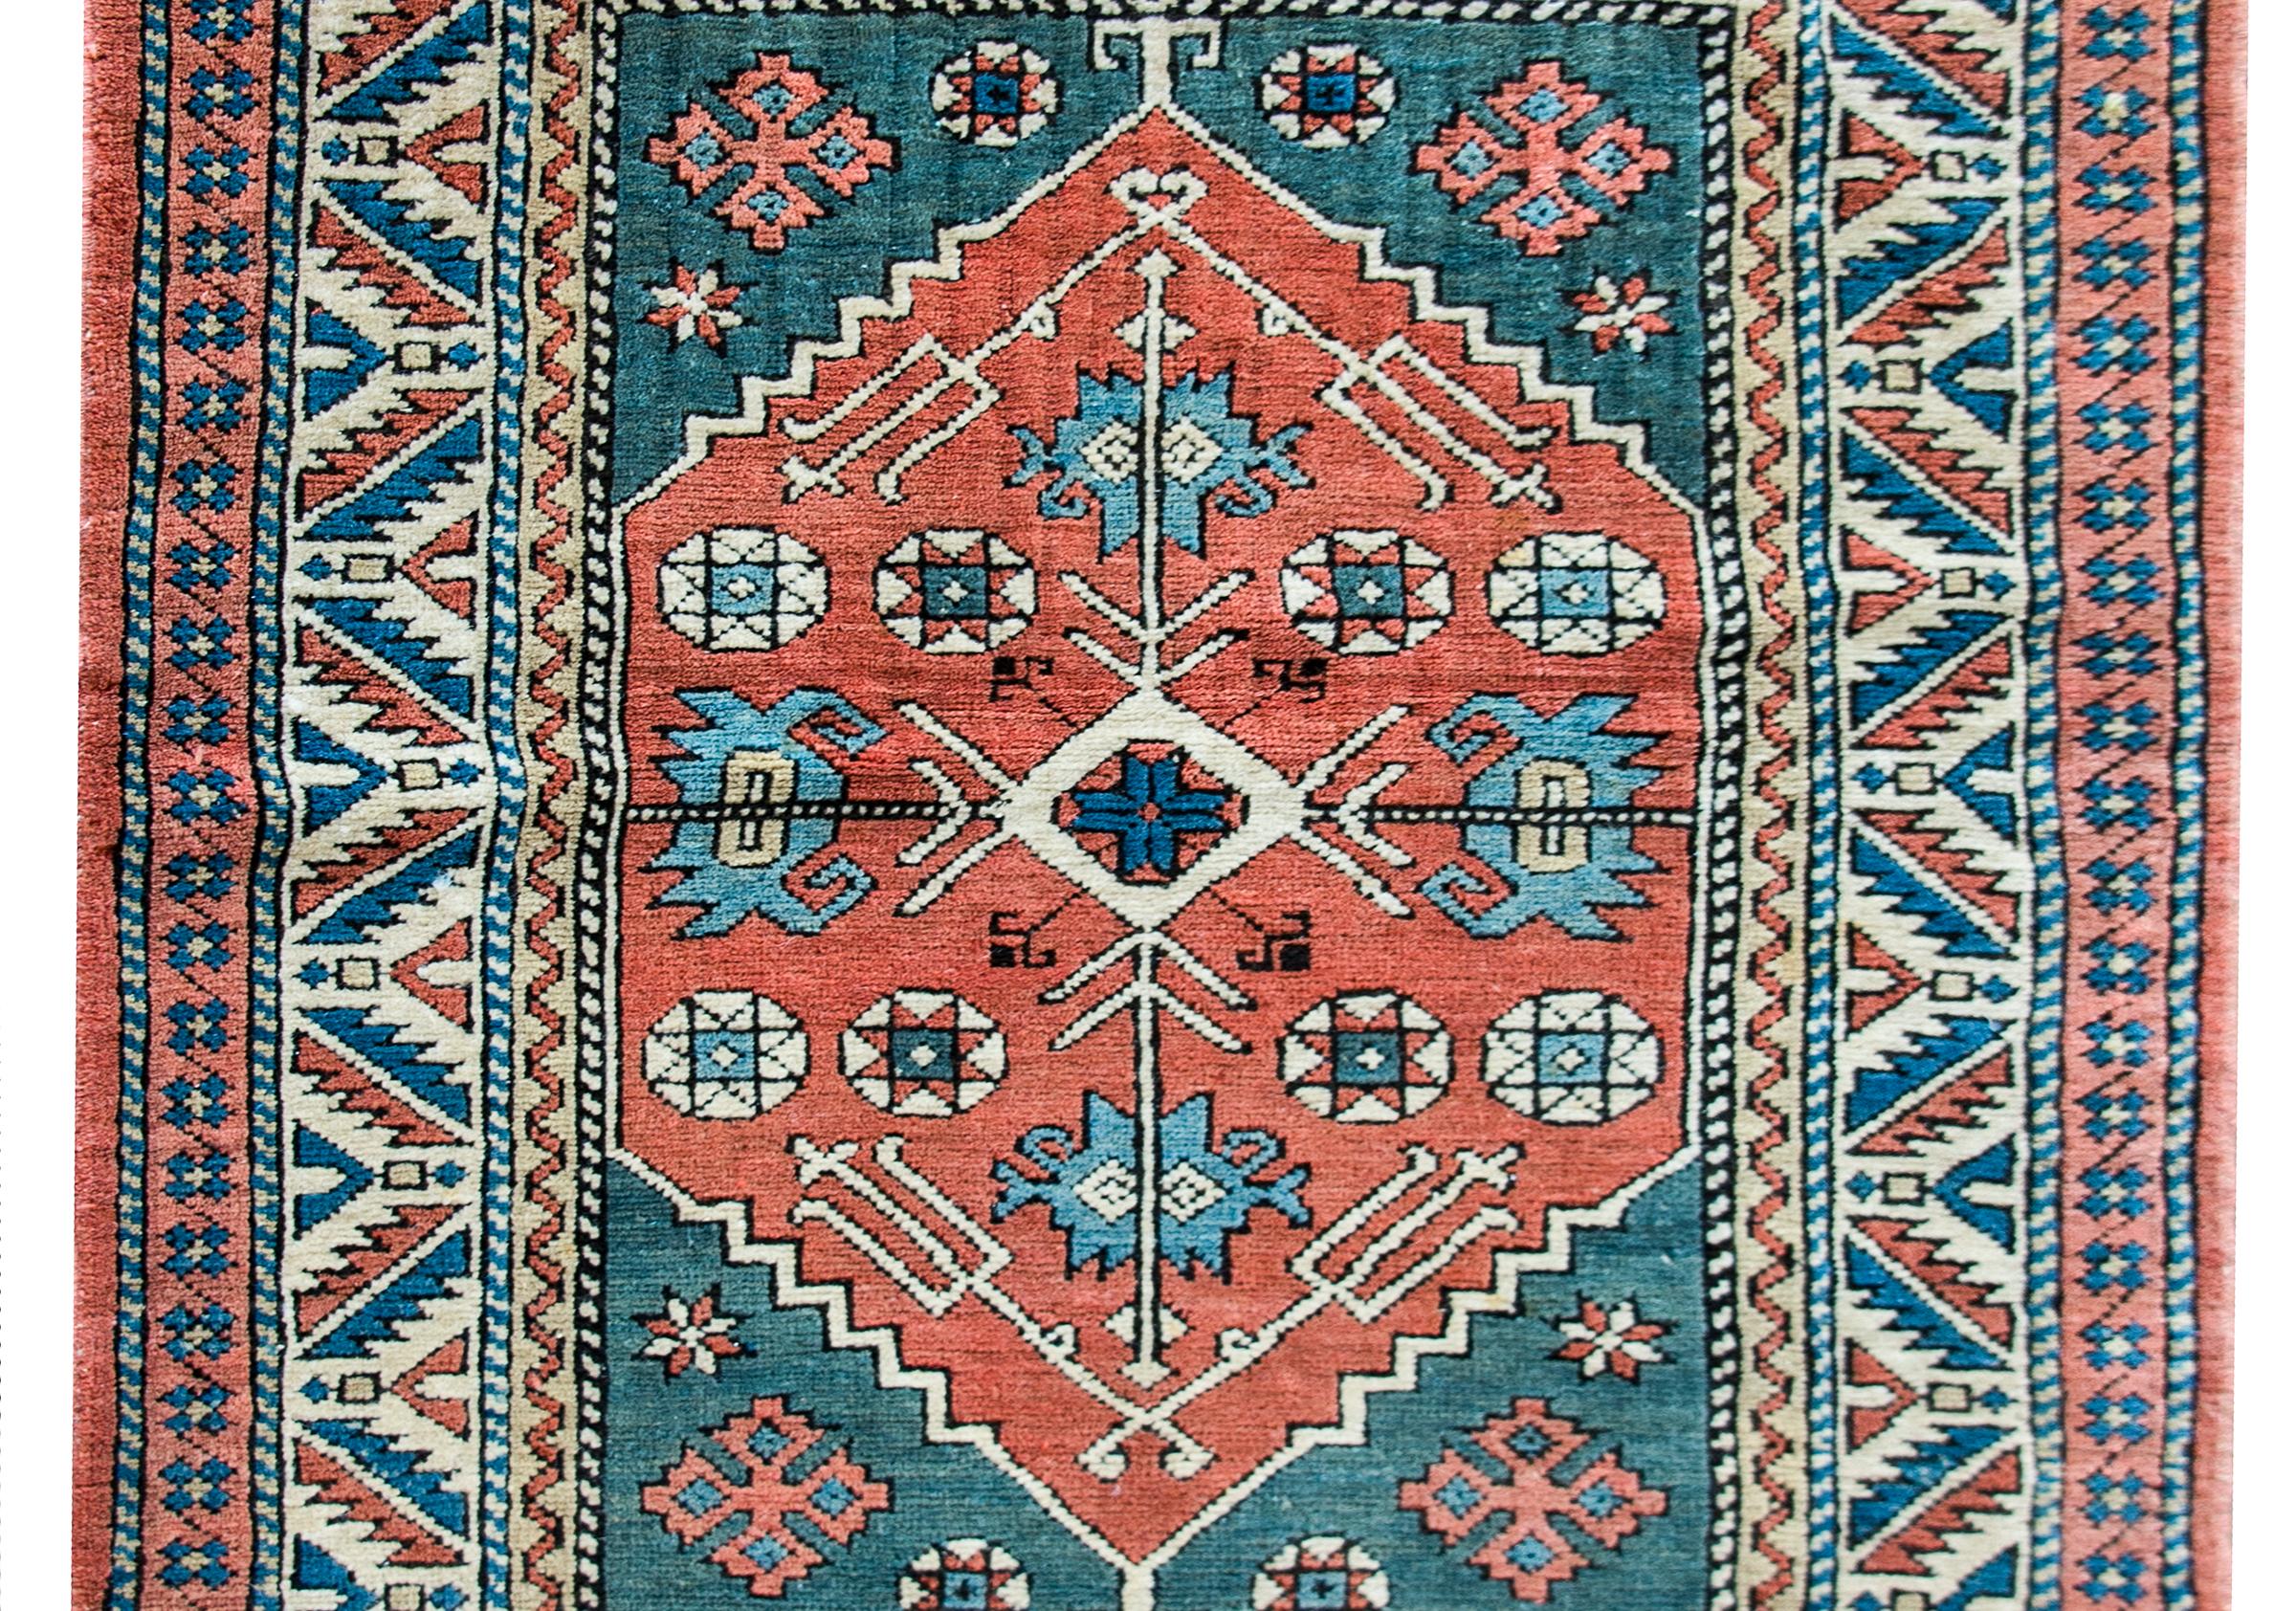 A beautiful late 20th century Persian Heriz rug with a sweet medallion with four flowers woven in indigo, green, and yellow, against a coral colored background. The border is wonderful composed with multiple geometric and stylized floral patterns